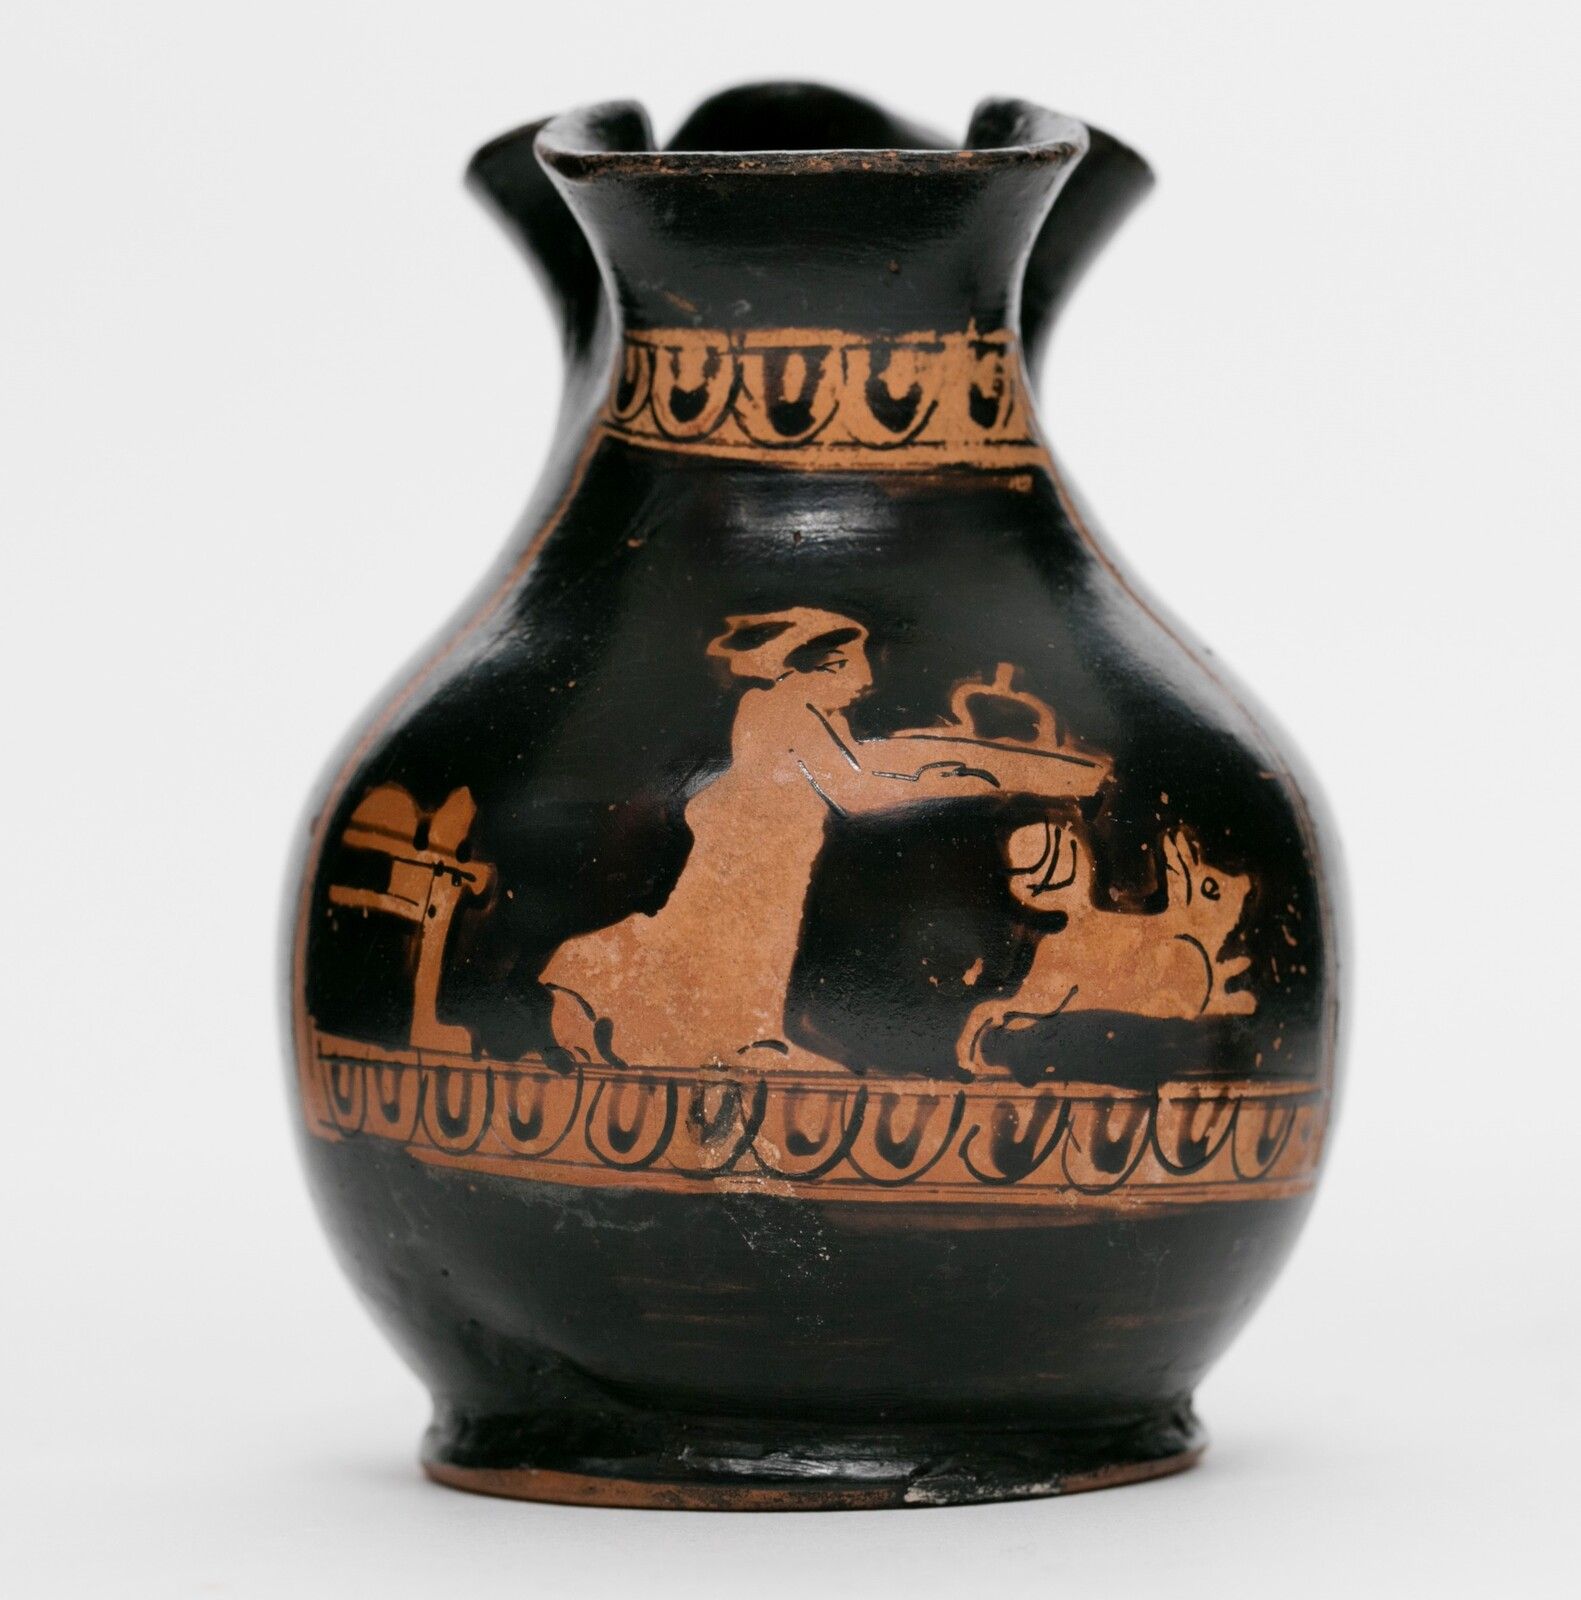 41: Two ancient Athenian vases depicting dogs